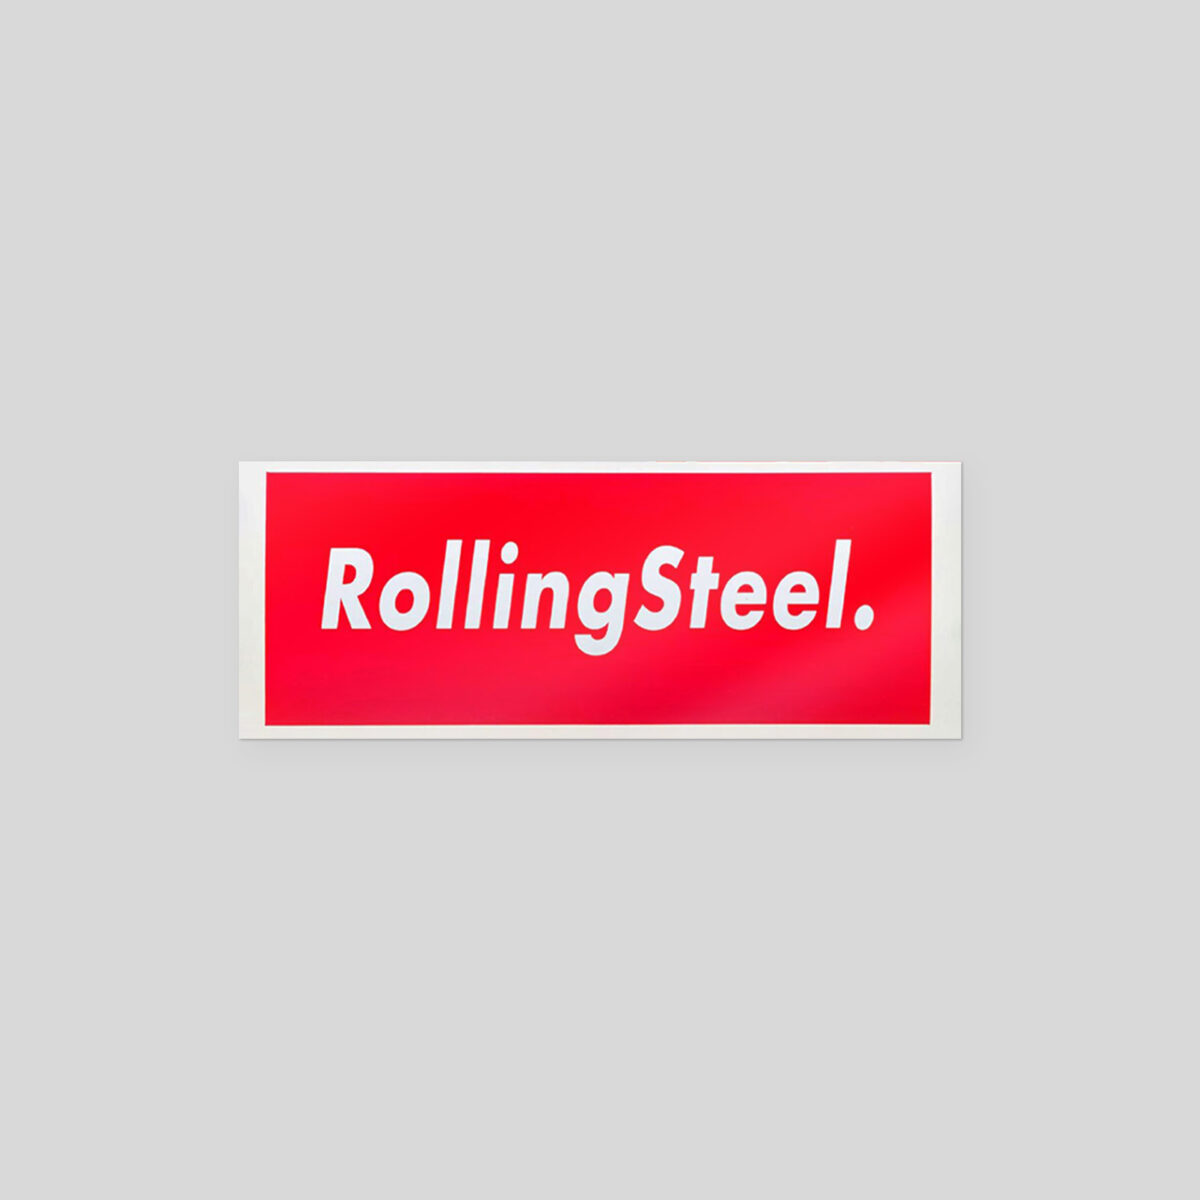 Patacco "RollingSteel"